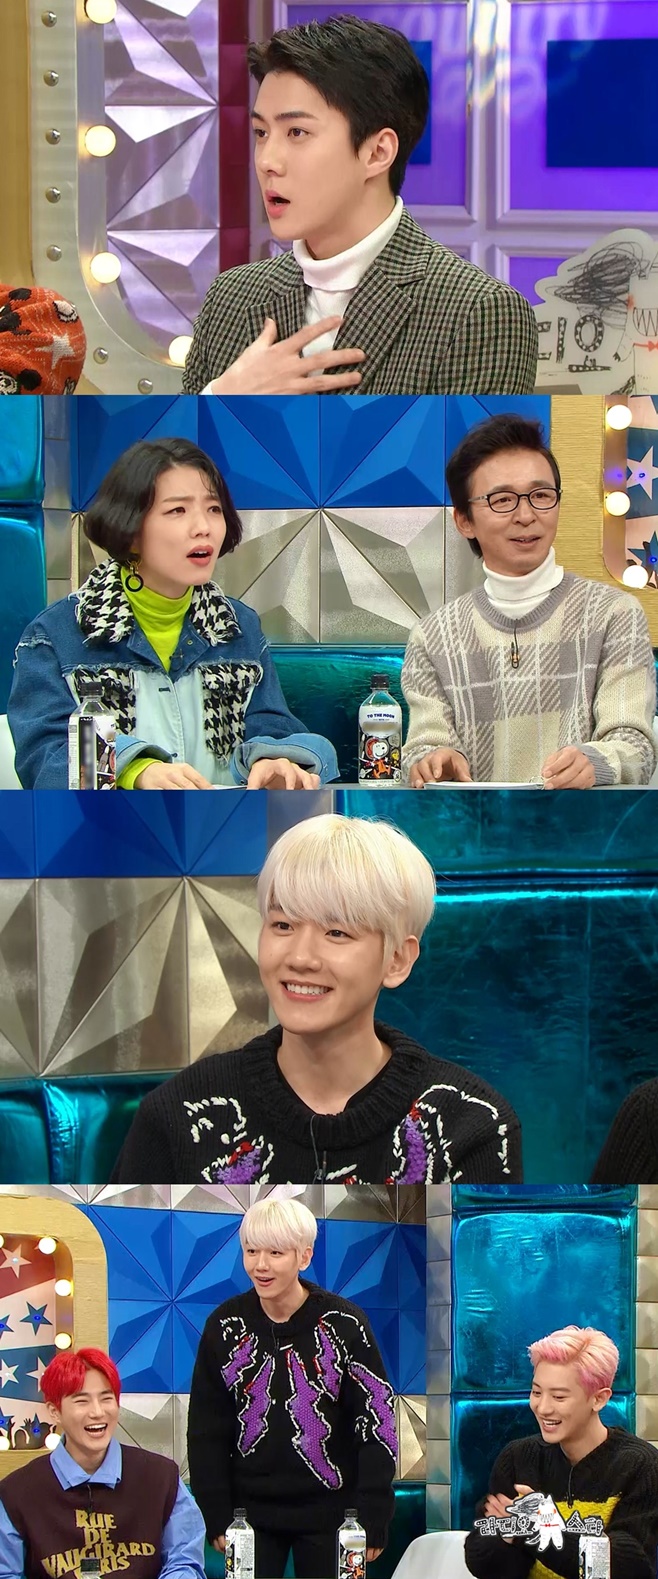 EXO Sehun appears on Radio Star and surprises everyone by telling them about Aging worries.MBC Radio Star, which is scheduled to air at 11:05 pm on the 4th, will be featured in EXO Radio Star, featuring EXO Suho, Baekhyun, Chanyeol, Kai, Sehun and Chen.EXOs youngest Sehun confessing Aging, which surprises everyone: Sehun recently complained of feeling Aging, which baffled his older brother and sisters.Chanyeol reveals the symptoms of Sehuns aging and focuses attention.Chanyeol is curious by telling the story of a diving trip by making an appointment, saying,  (Sehun) did not come after a while.Sehun reveals behind-the-scenes encounter with US President Ivana TrumpEXO was invited to the presidential dinner of President Ivana Trump in June to gather topics.At the time, Sehun added curiosity by Confessions that he was sweating cold ahead of his handshake with President Ivana Trump.Baekhyun, however, is interested in the huge monthly expenditures of the company.Among them, EXO members will be the first to be selected by the top importer.Baekhyun is proud of the EXO that appeared in the textbook. Baekhyun, who said that being a group in the textbook was a long dream, was thrilled that he finally dreamed.Chanyeol is also said to have boasted an extraordinary class by telling an anecdote that he felt EXO adjudication in Dubai.In addition, Baekhyun is the official entertainment director selected by EXO members, who showed strong trust that all members believe in Baekhyun.As if to prove this, Baekhyun is known to have proved his sense of entertainment with a vocal simulation parade.EXO youngest Sehuns Aging worry and vocal simulation of Baekhyun, who is in charge of entertainment, can be confirmed through Radio Star, which will be broadcasted at 11:05 pm on the 4th.